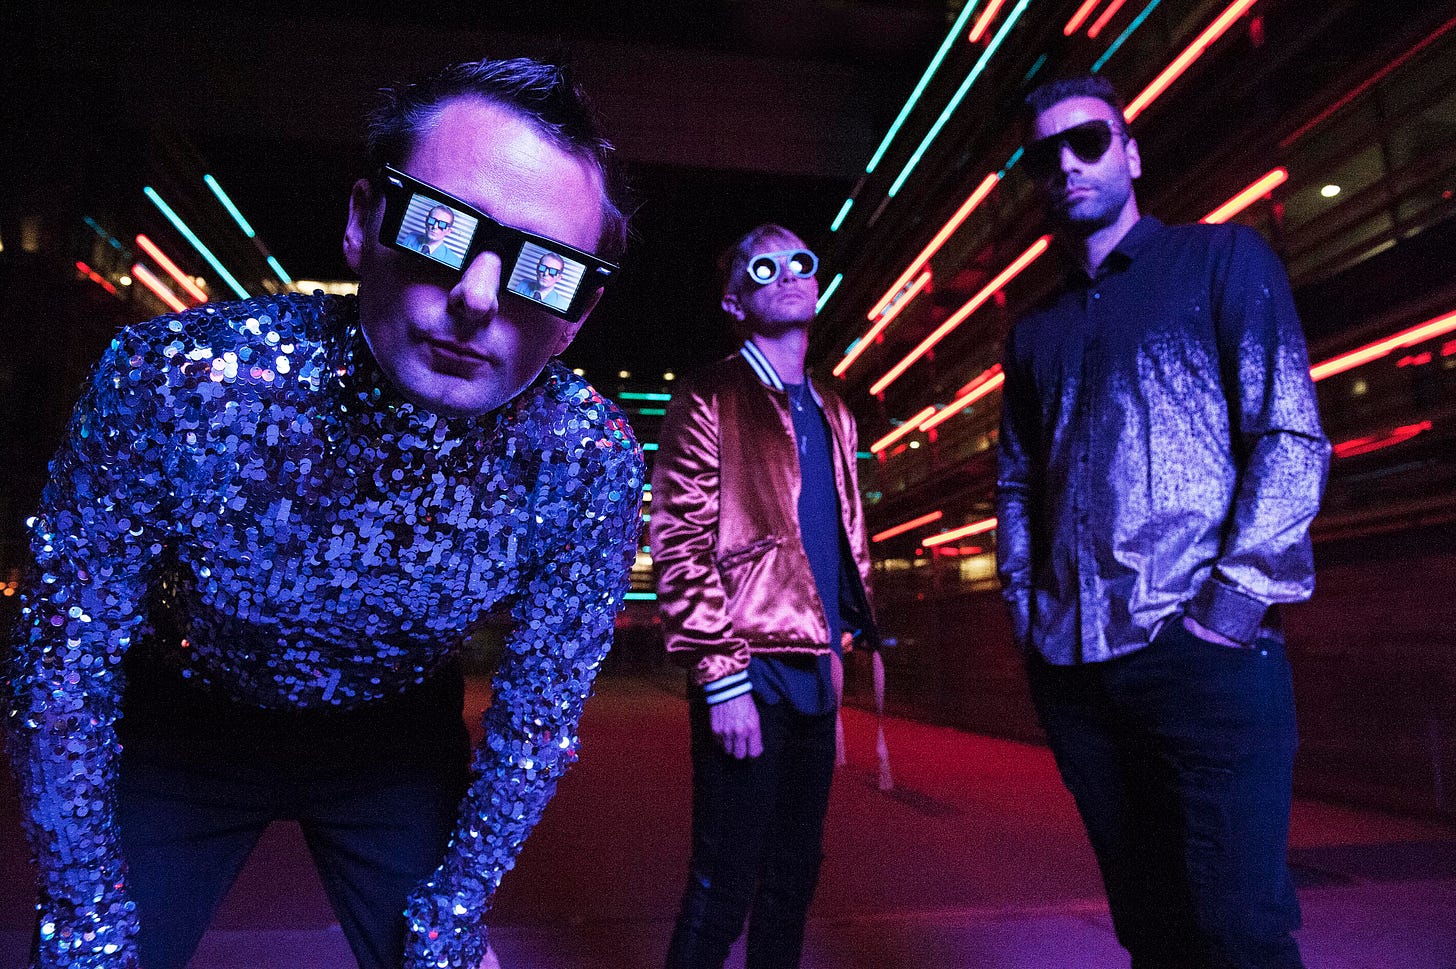 Muse frontman Matt Bellamy on finding the good side of technology via  virtual reality — as he admits band 'partied a**es off' after second album  | The Sun